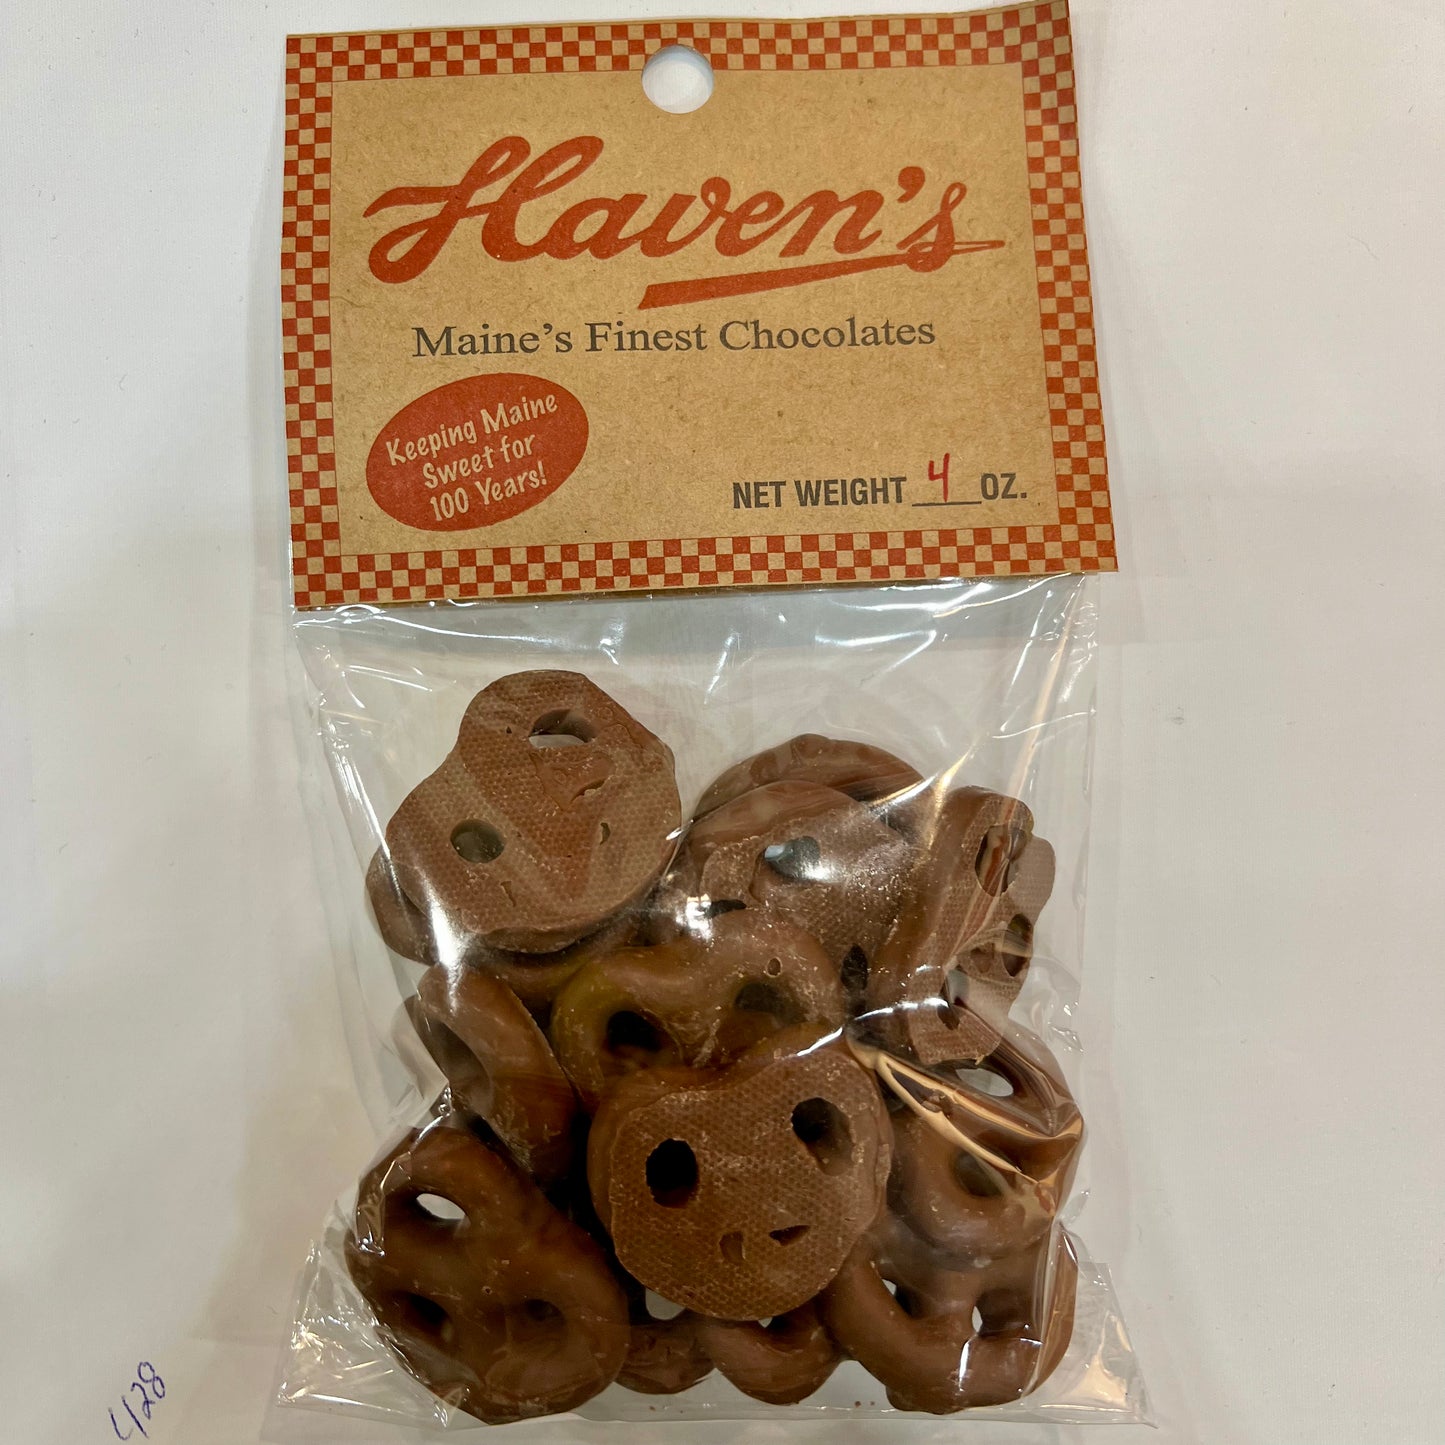 Chocolate Covered Pretzels - Haven's